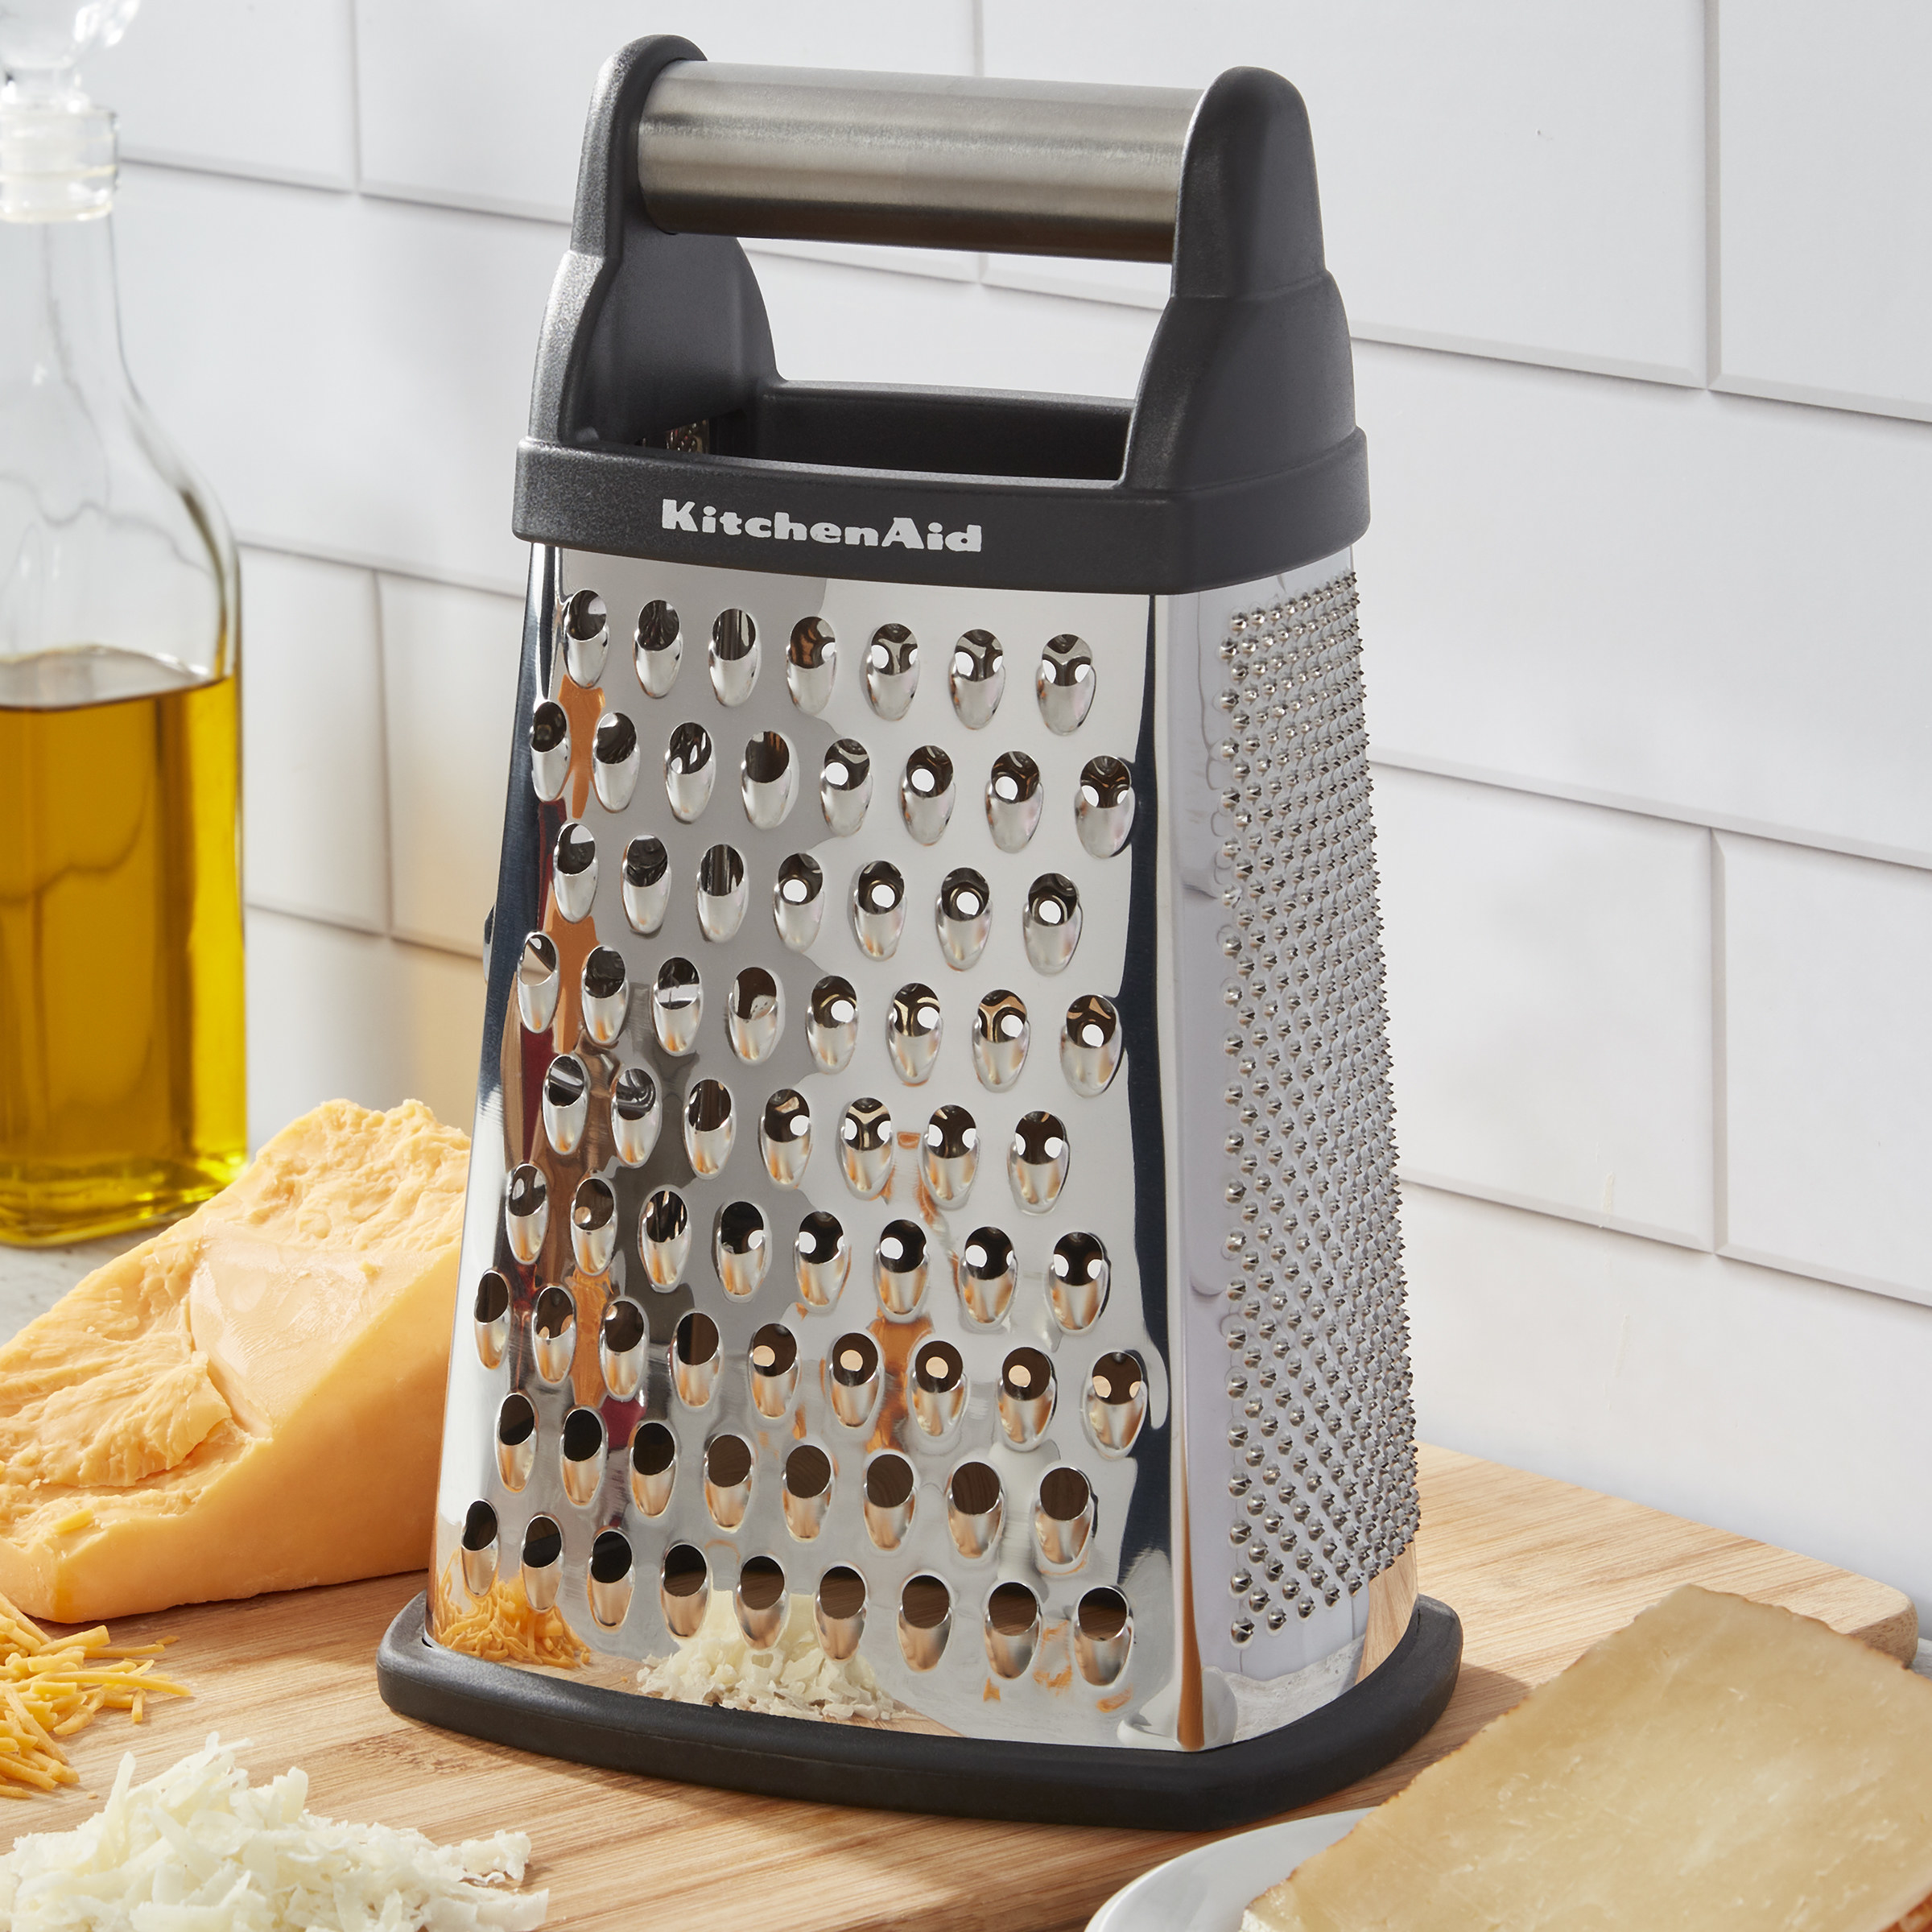 The box grater